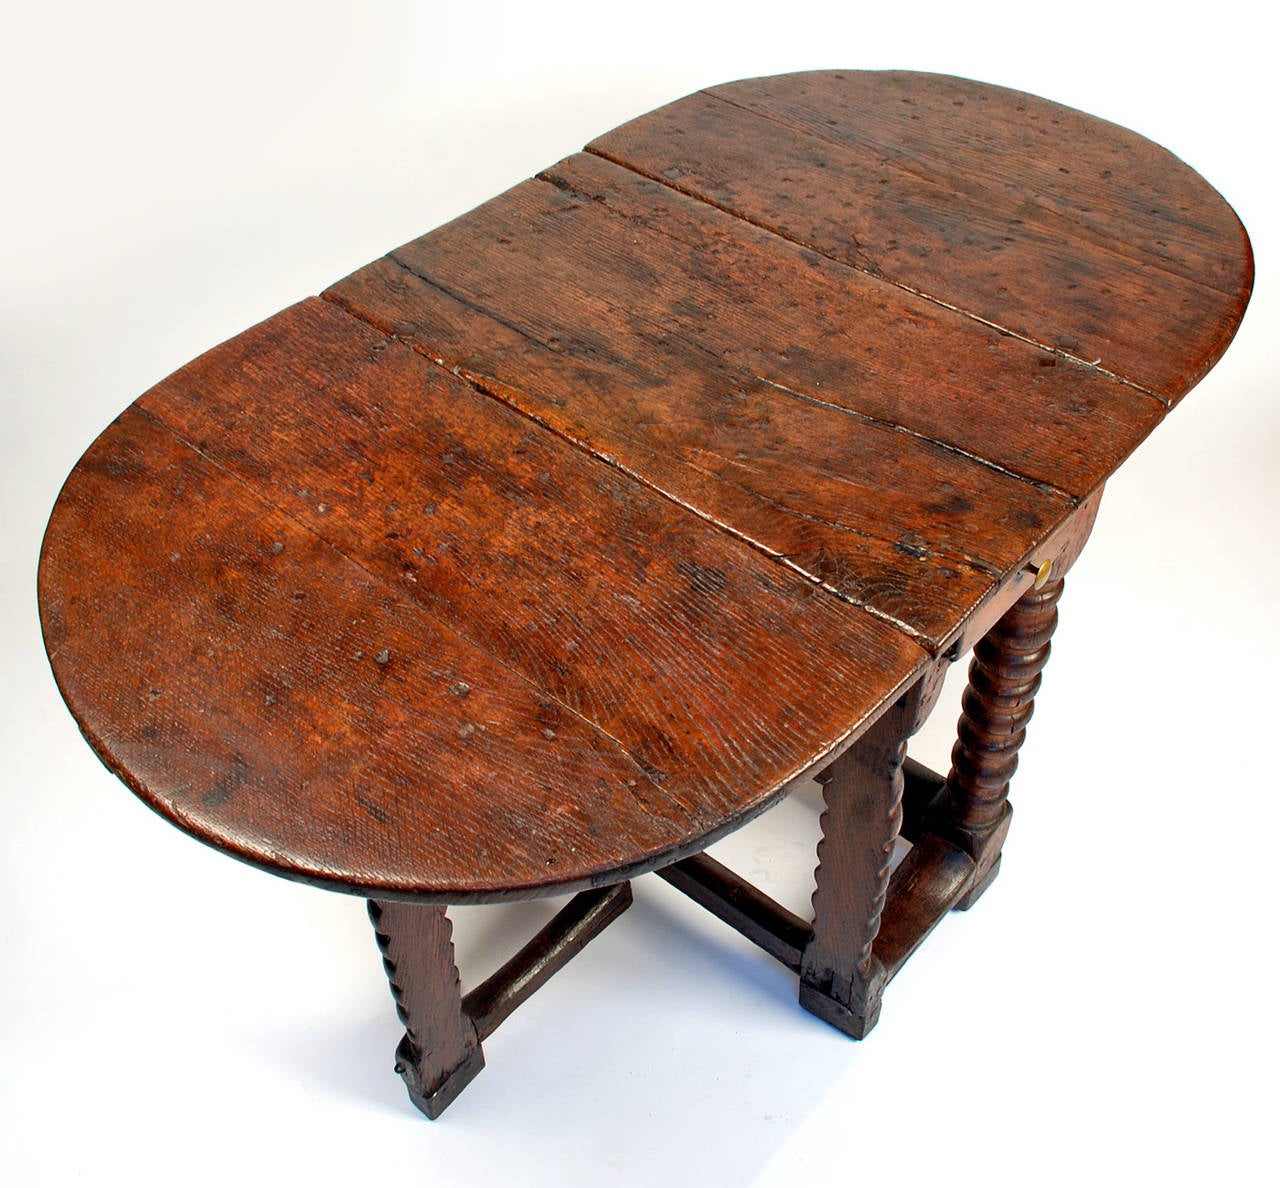 Rare Early Spanish Chestnut Gate-Leg Table In Excellent Condition For Sale In San Francisco, CA